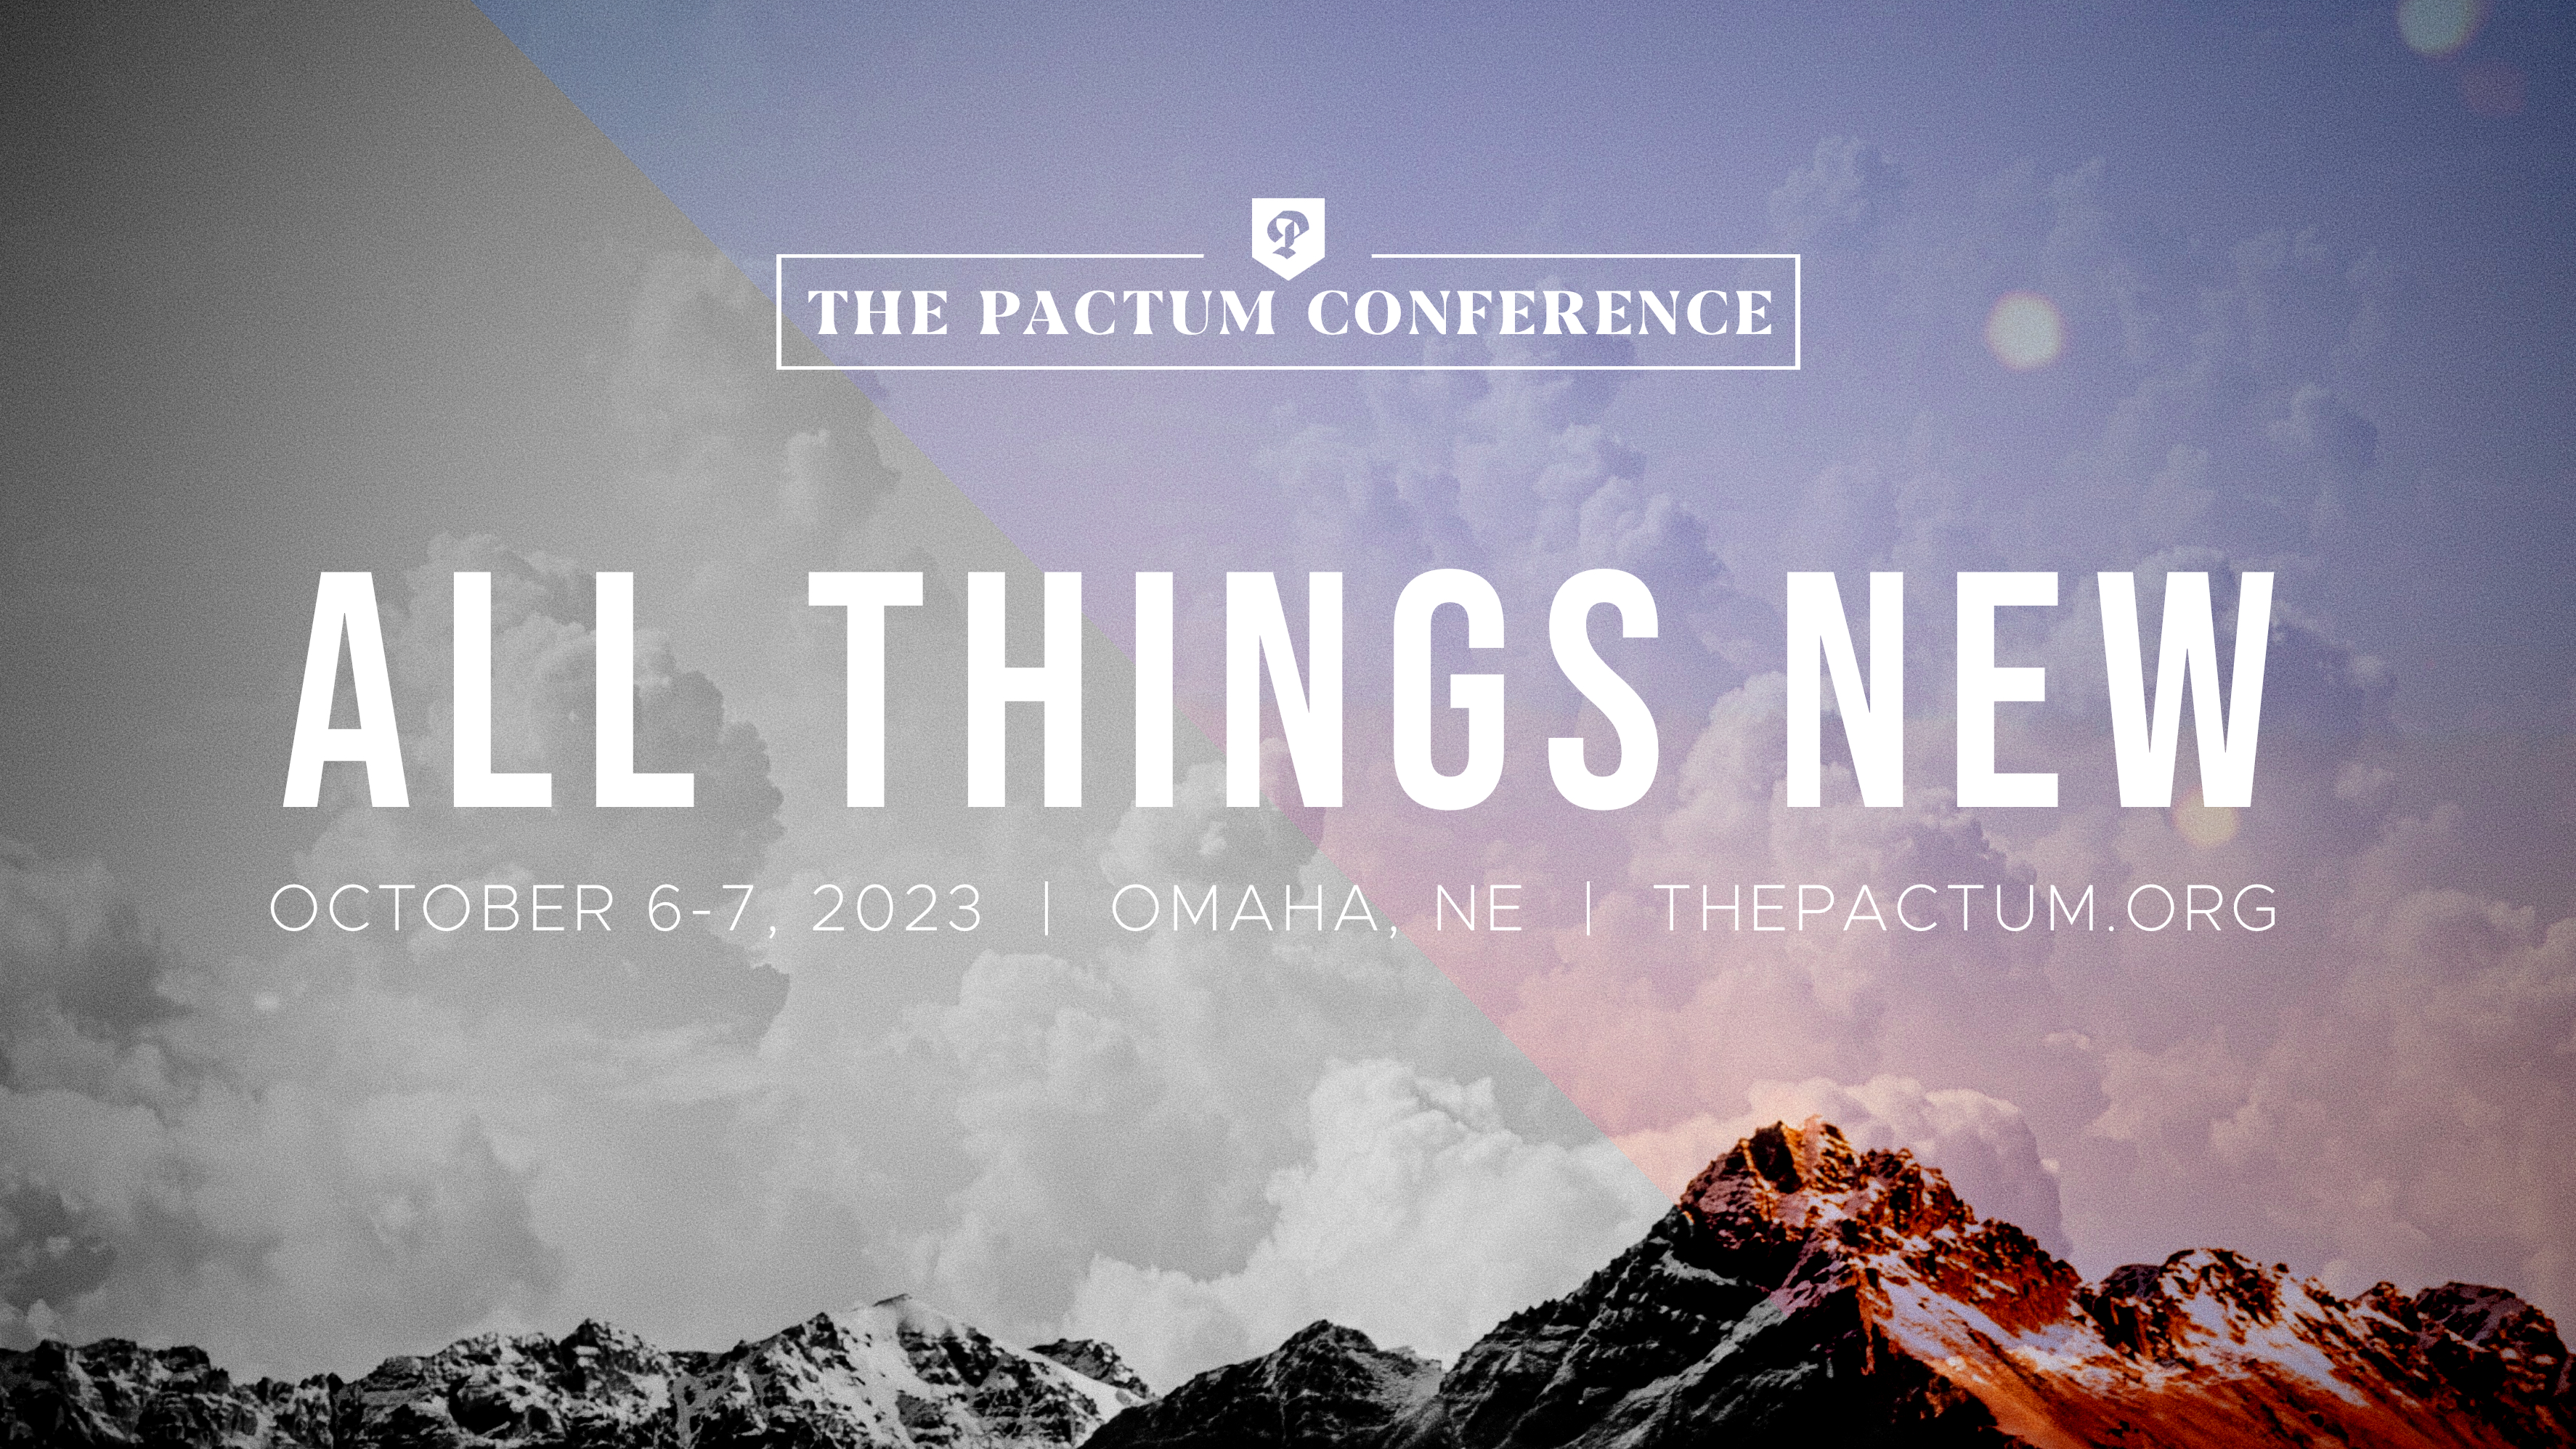 pactumconference_1920x1080 image